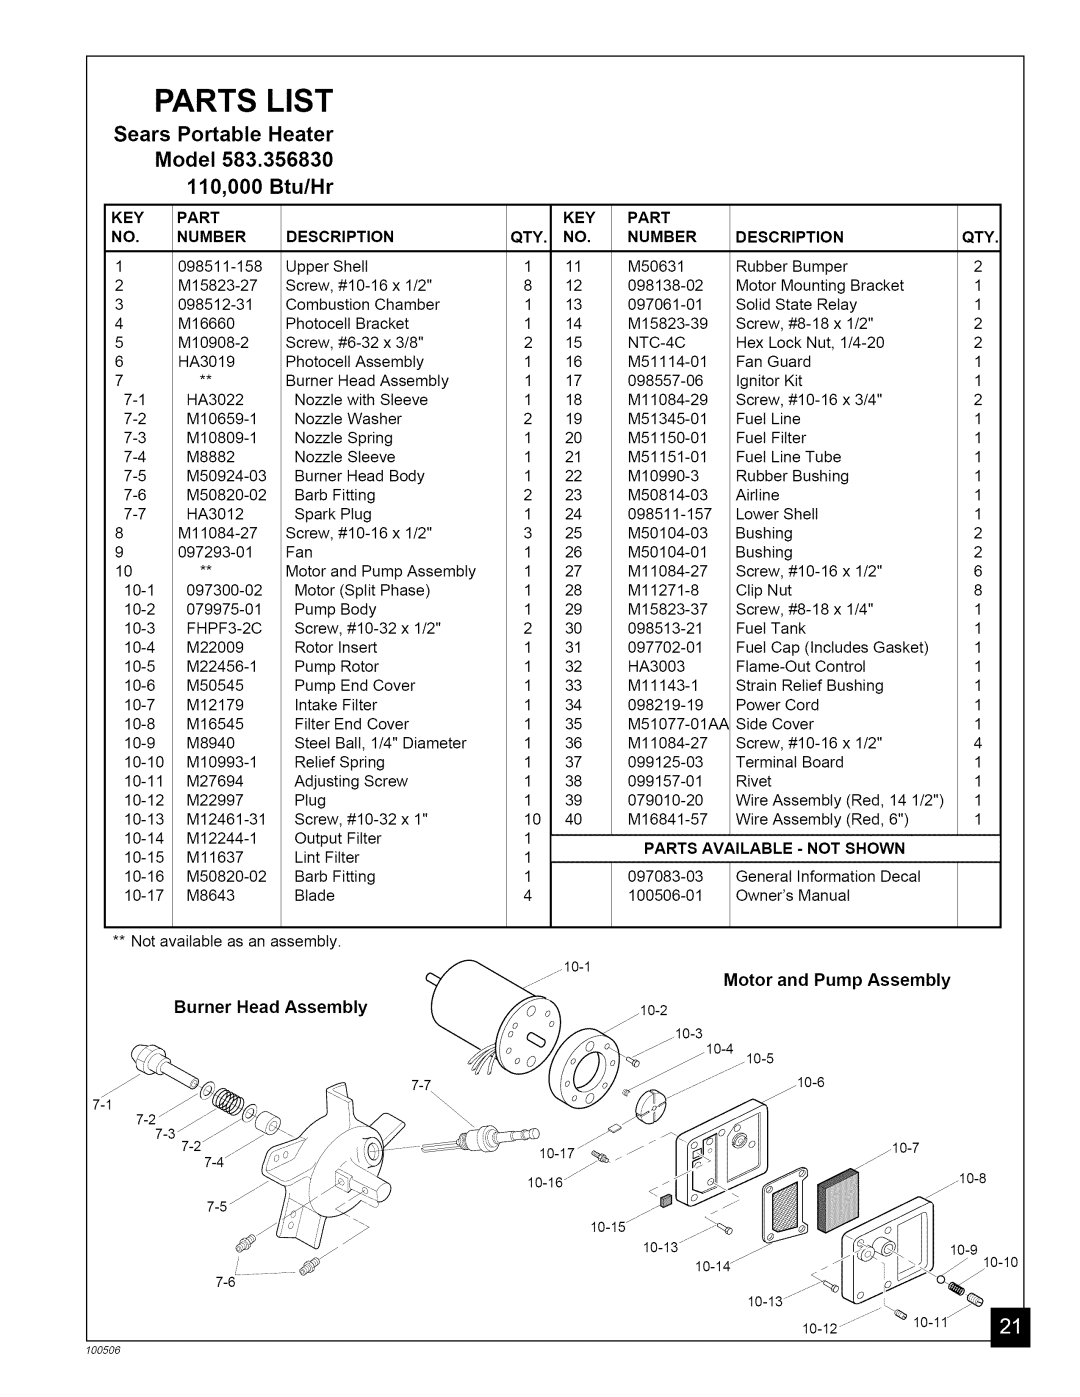 Sears 583.35683 Sears Portable Heater Model, 110,000, Btu/Hr, Burner Head Assembly, Parts List, Motor and Pump Assembly 